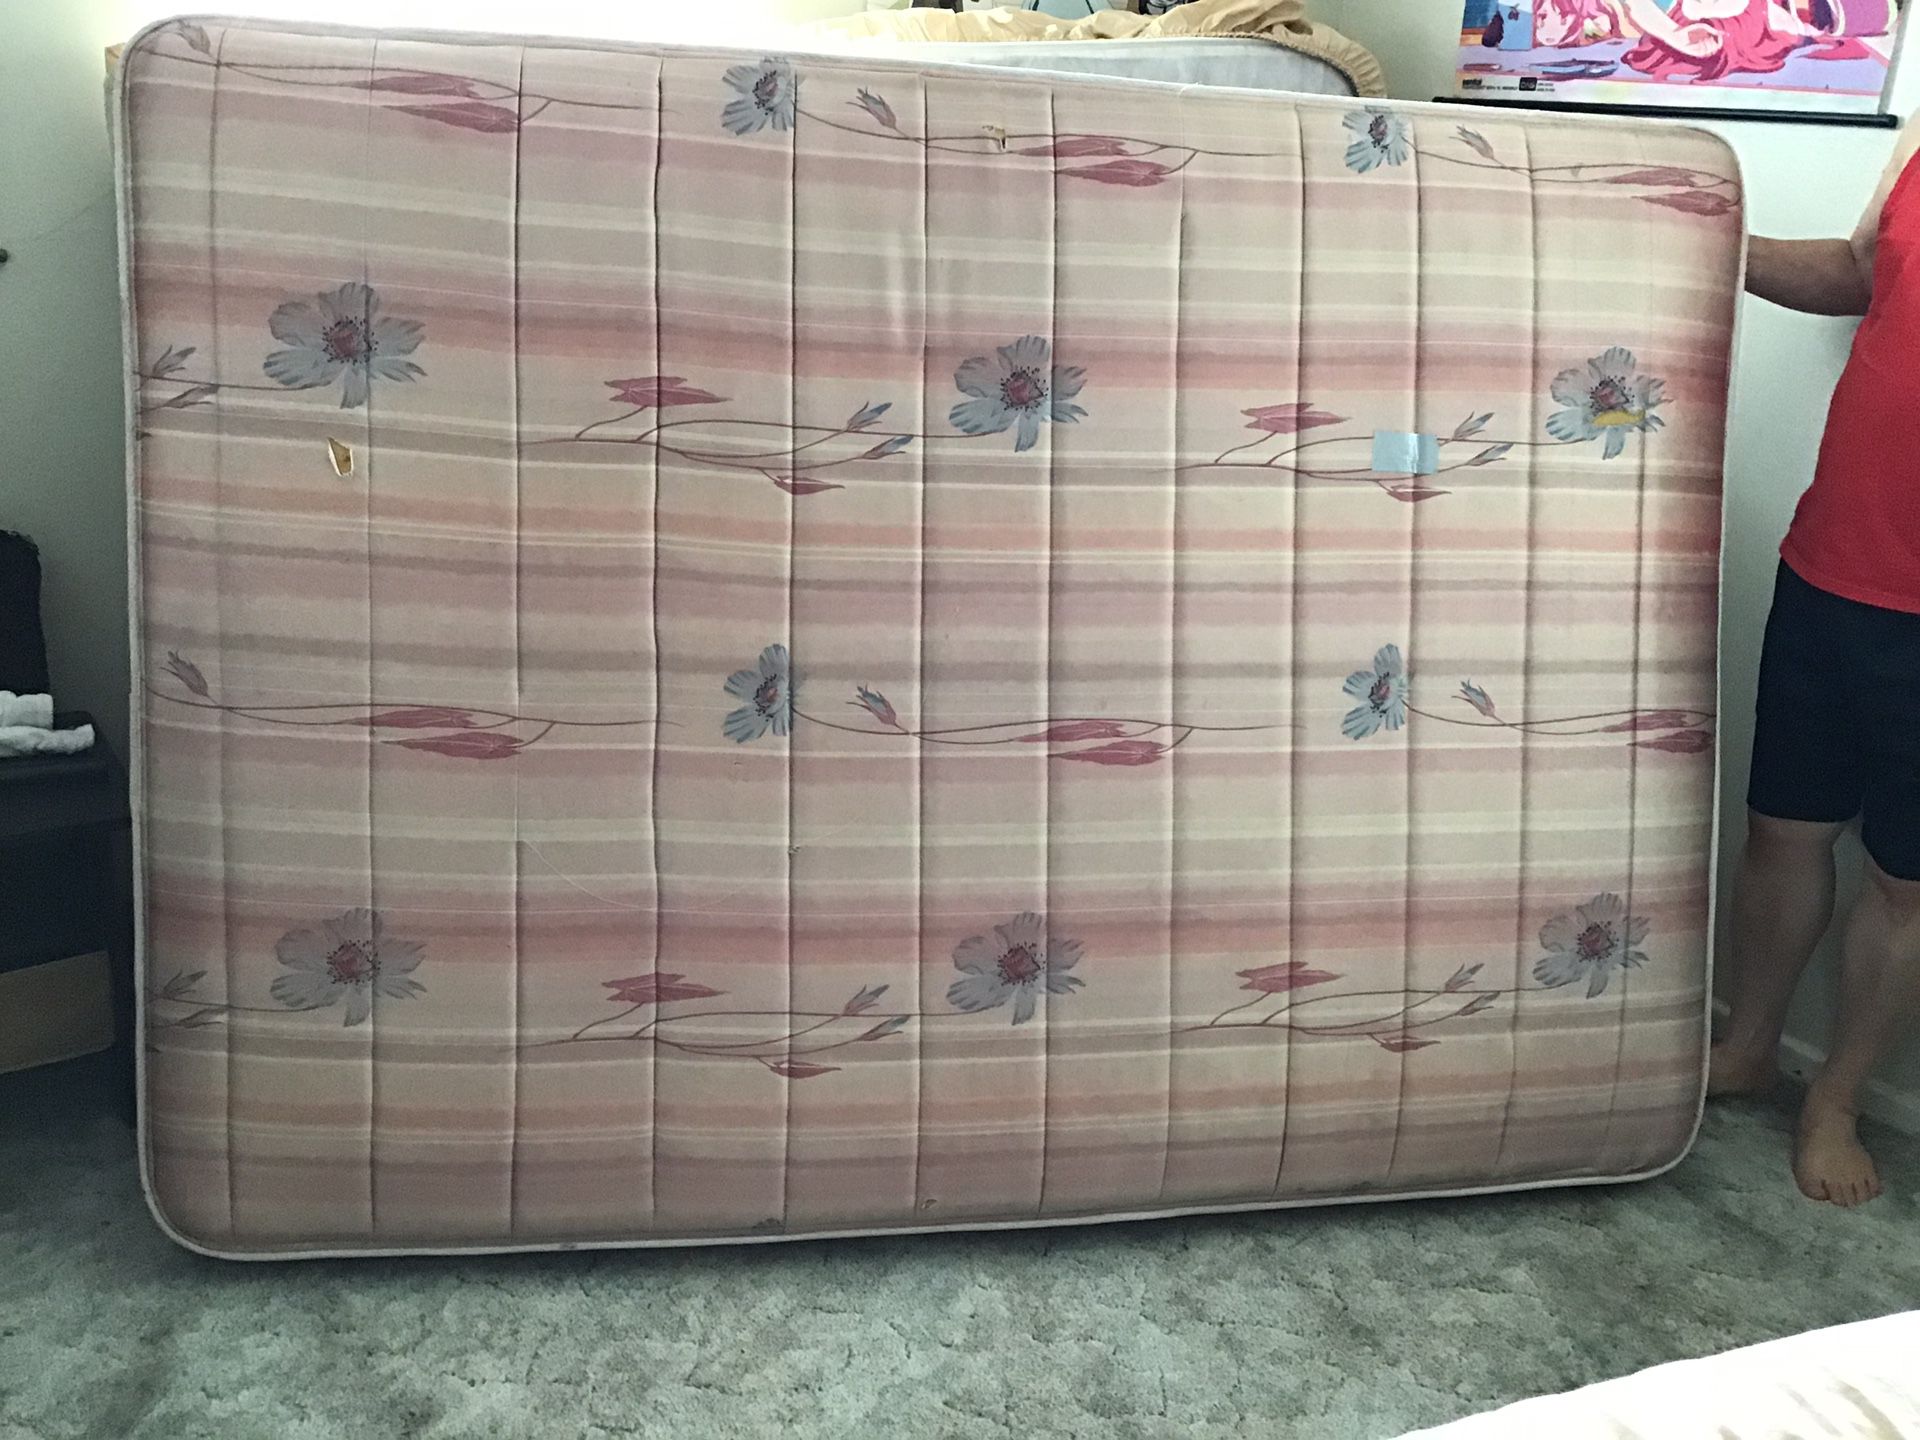 Full size mattress (with small tear) & box spring - $99